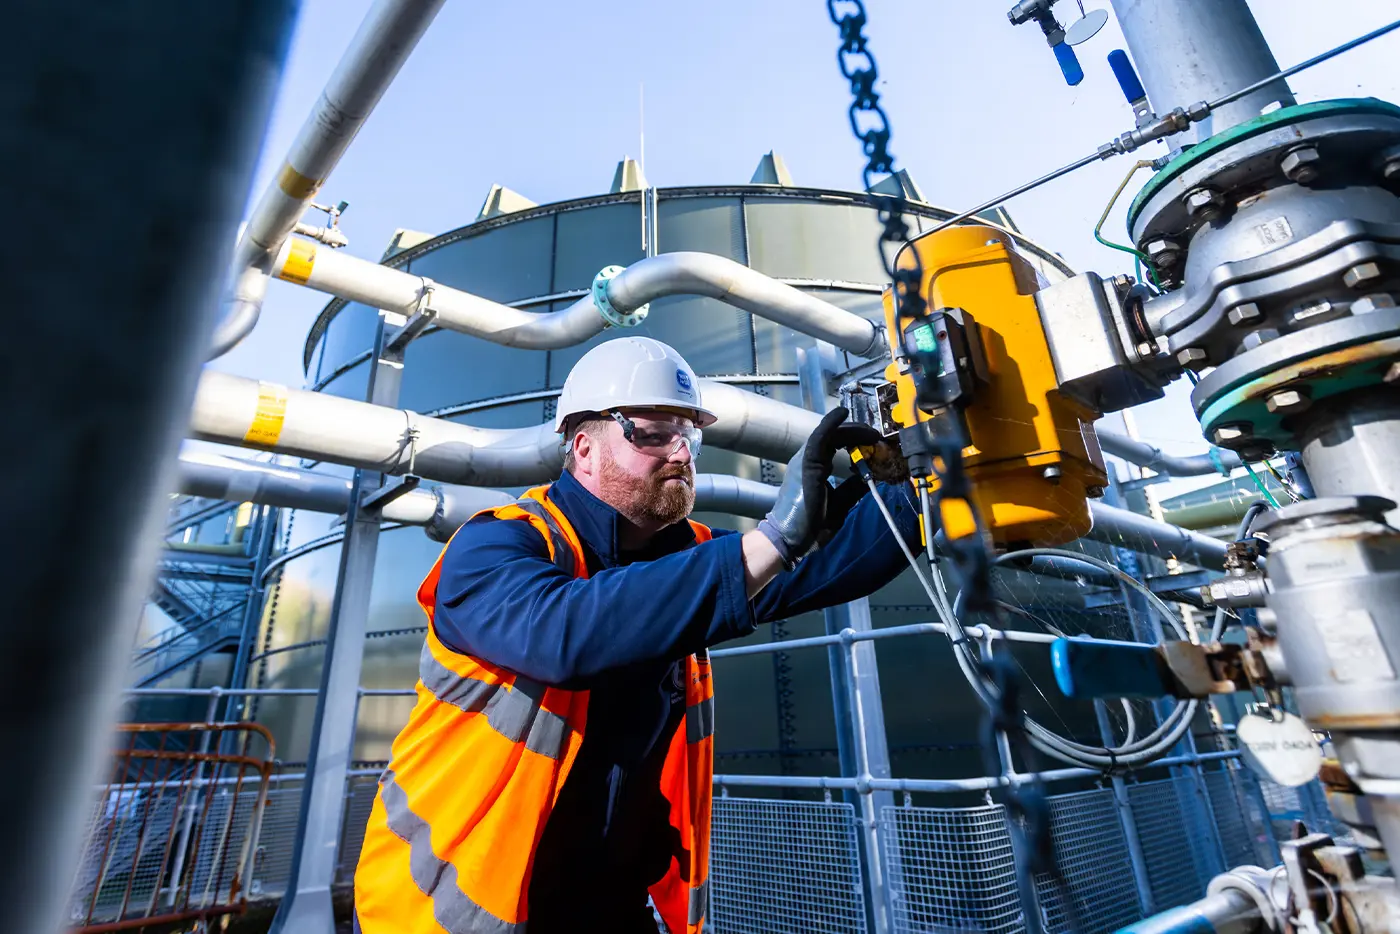 A Southern Water engineer inspects a control valve at a wastewater treatment works